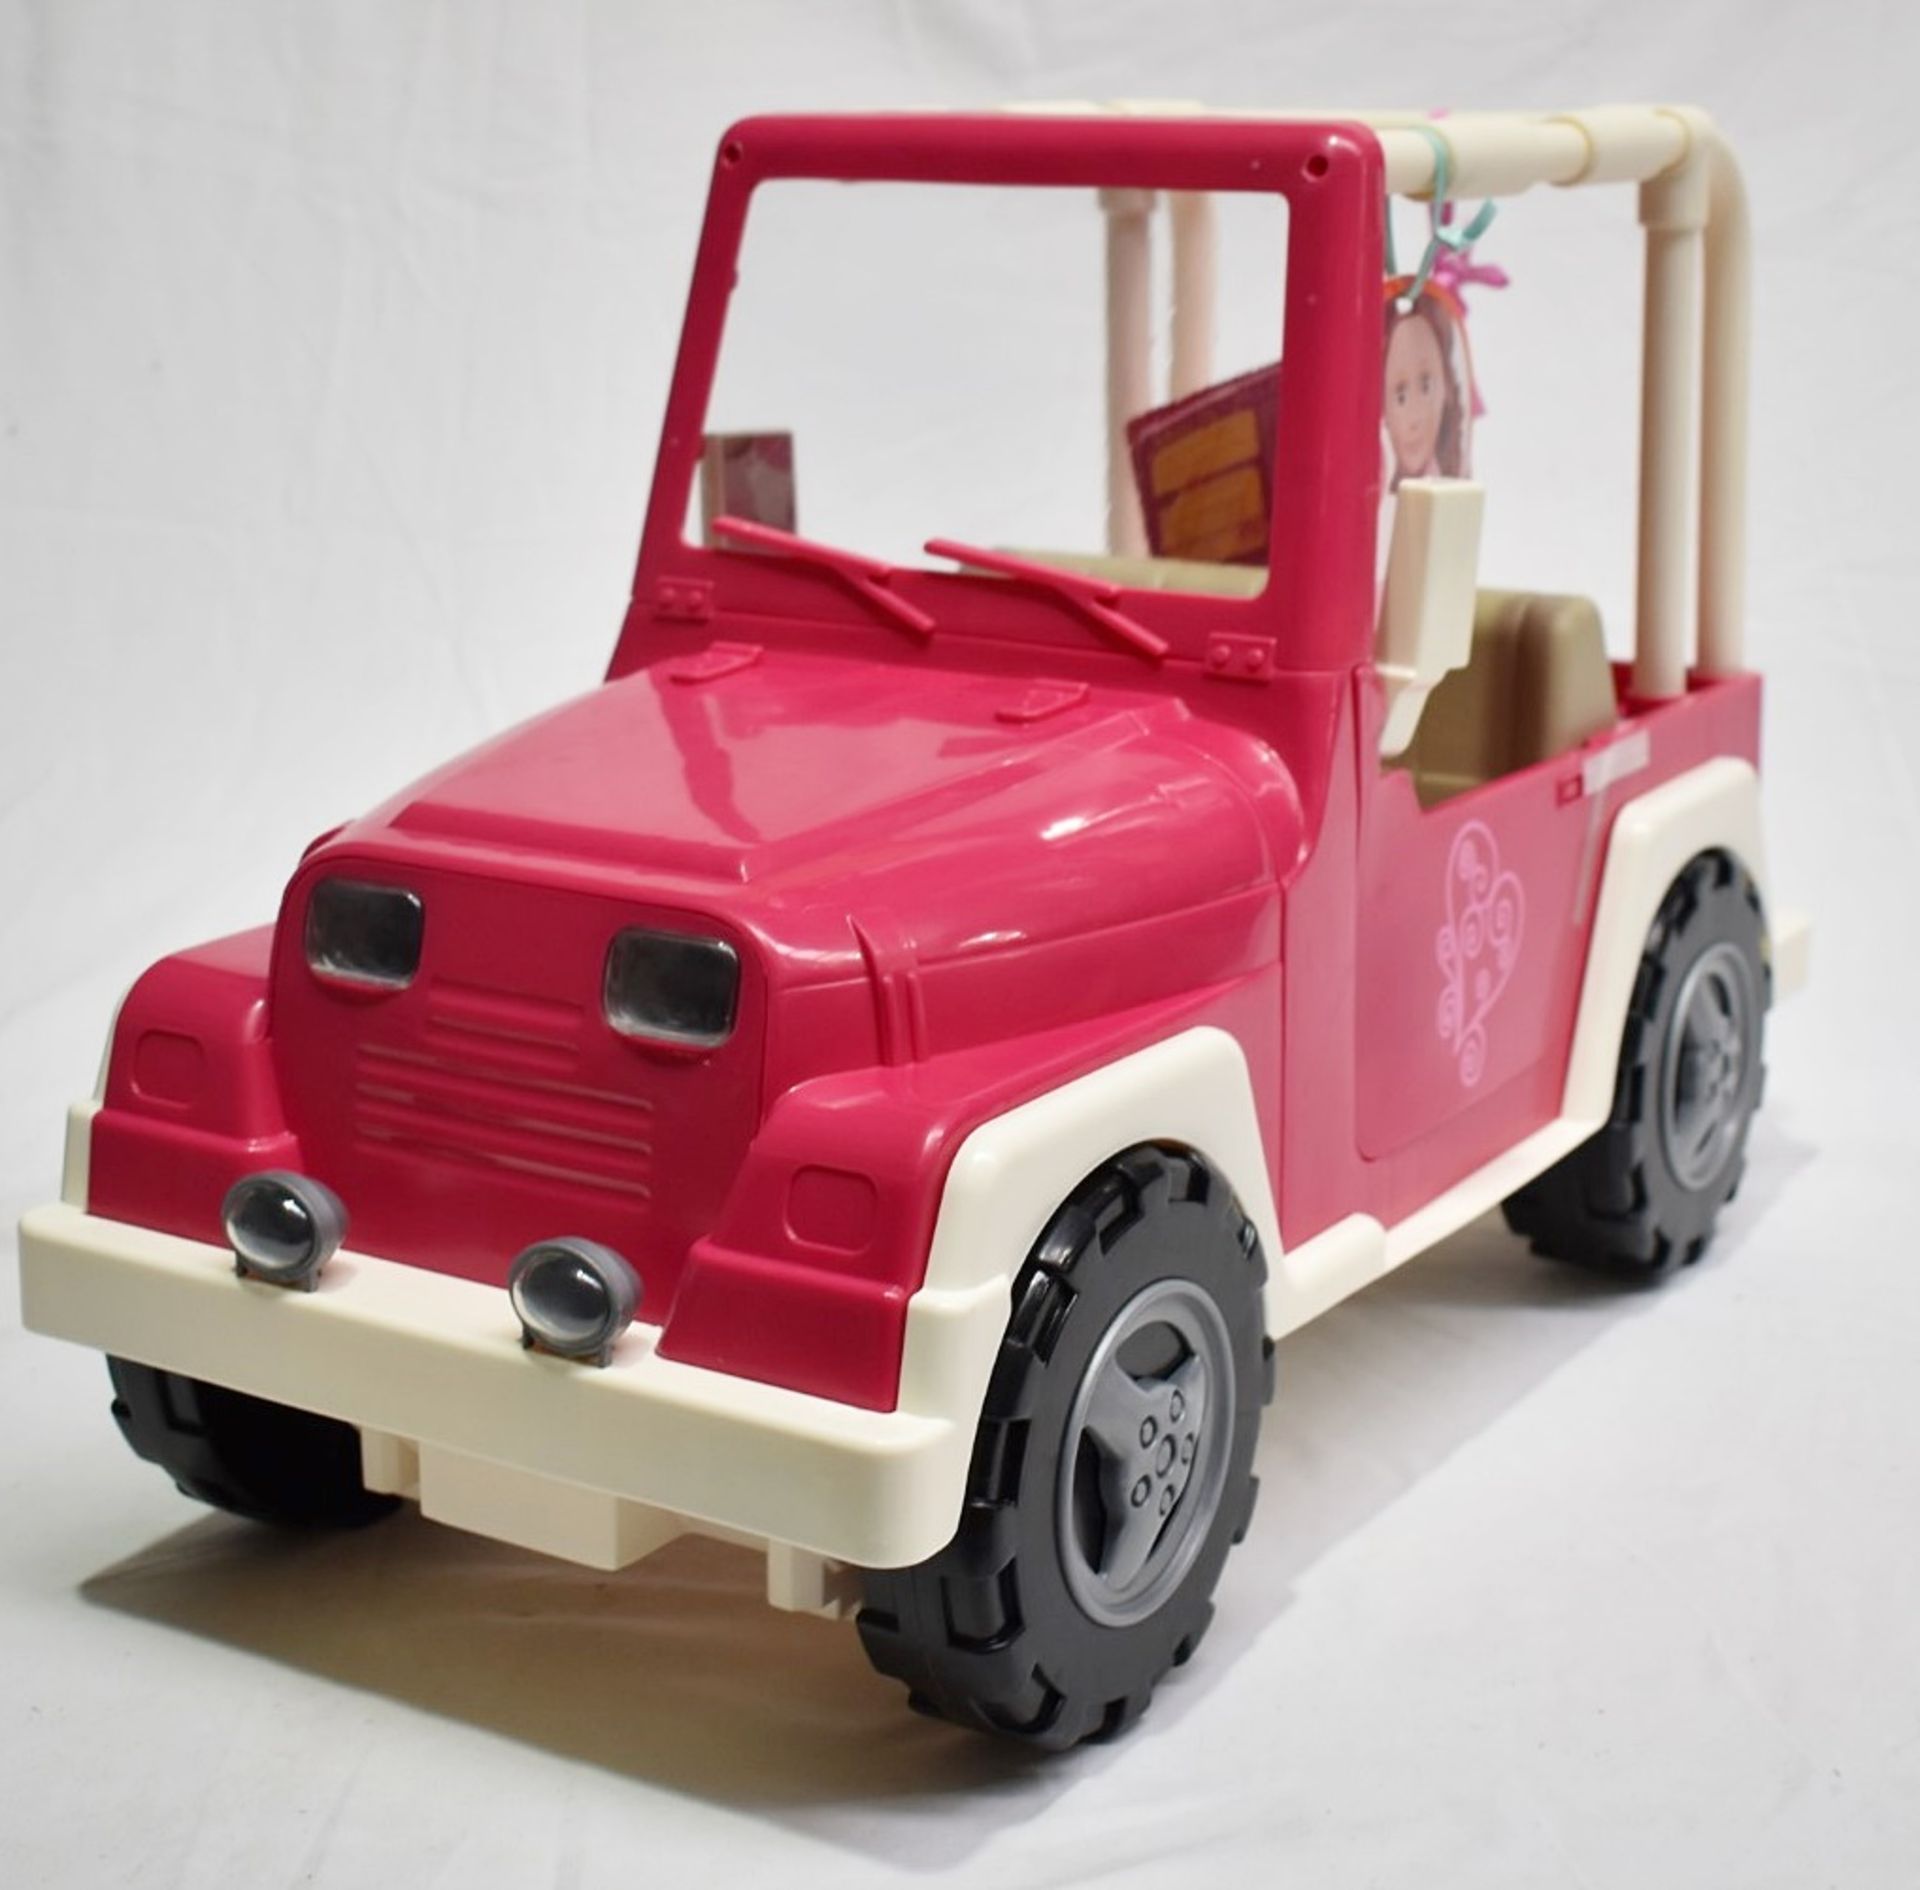 1 x OUR GENERATION 4x4 Off Roader Toy with Built-in Bluetooth Speakers - Original Price £169.00 - Bild 3 aus 5